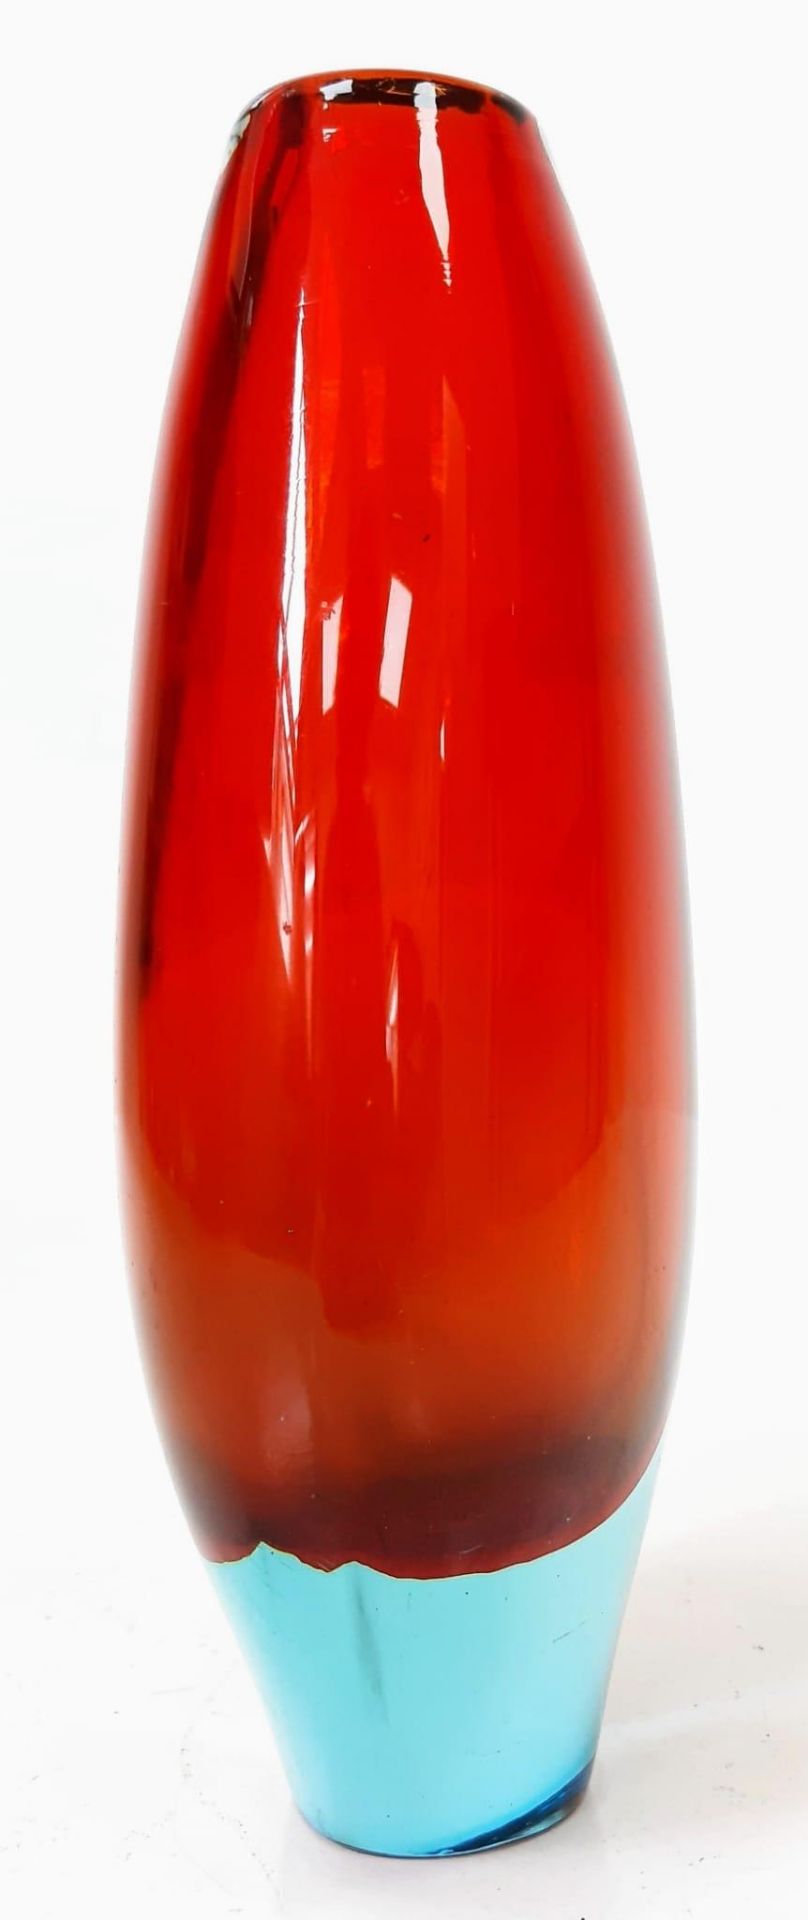 A Murano-Inspired Fire-Red and Sky-Blue Decorative Glass Vase. 24cm tall - Image 4 of 6